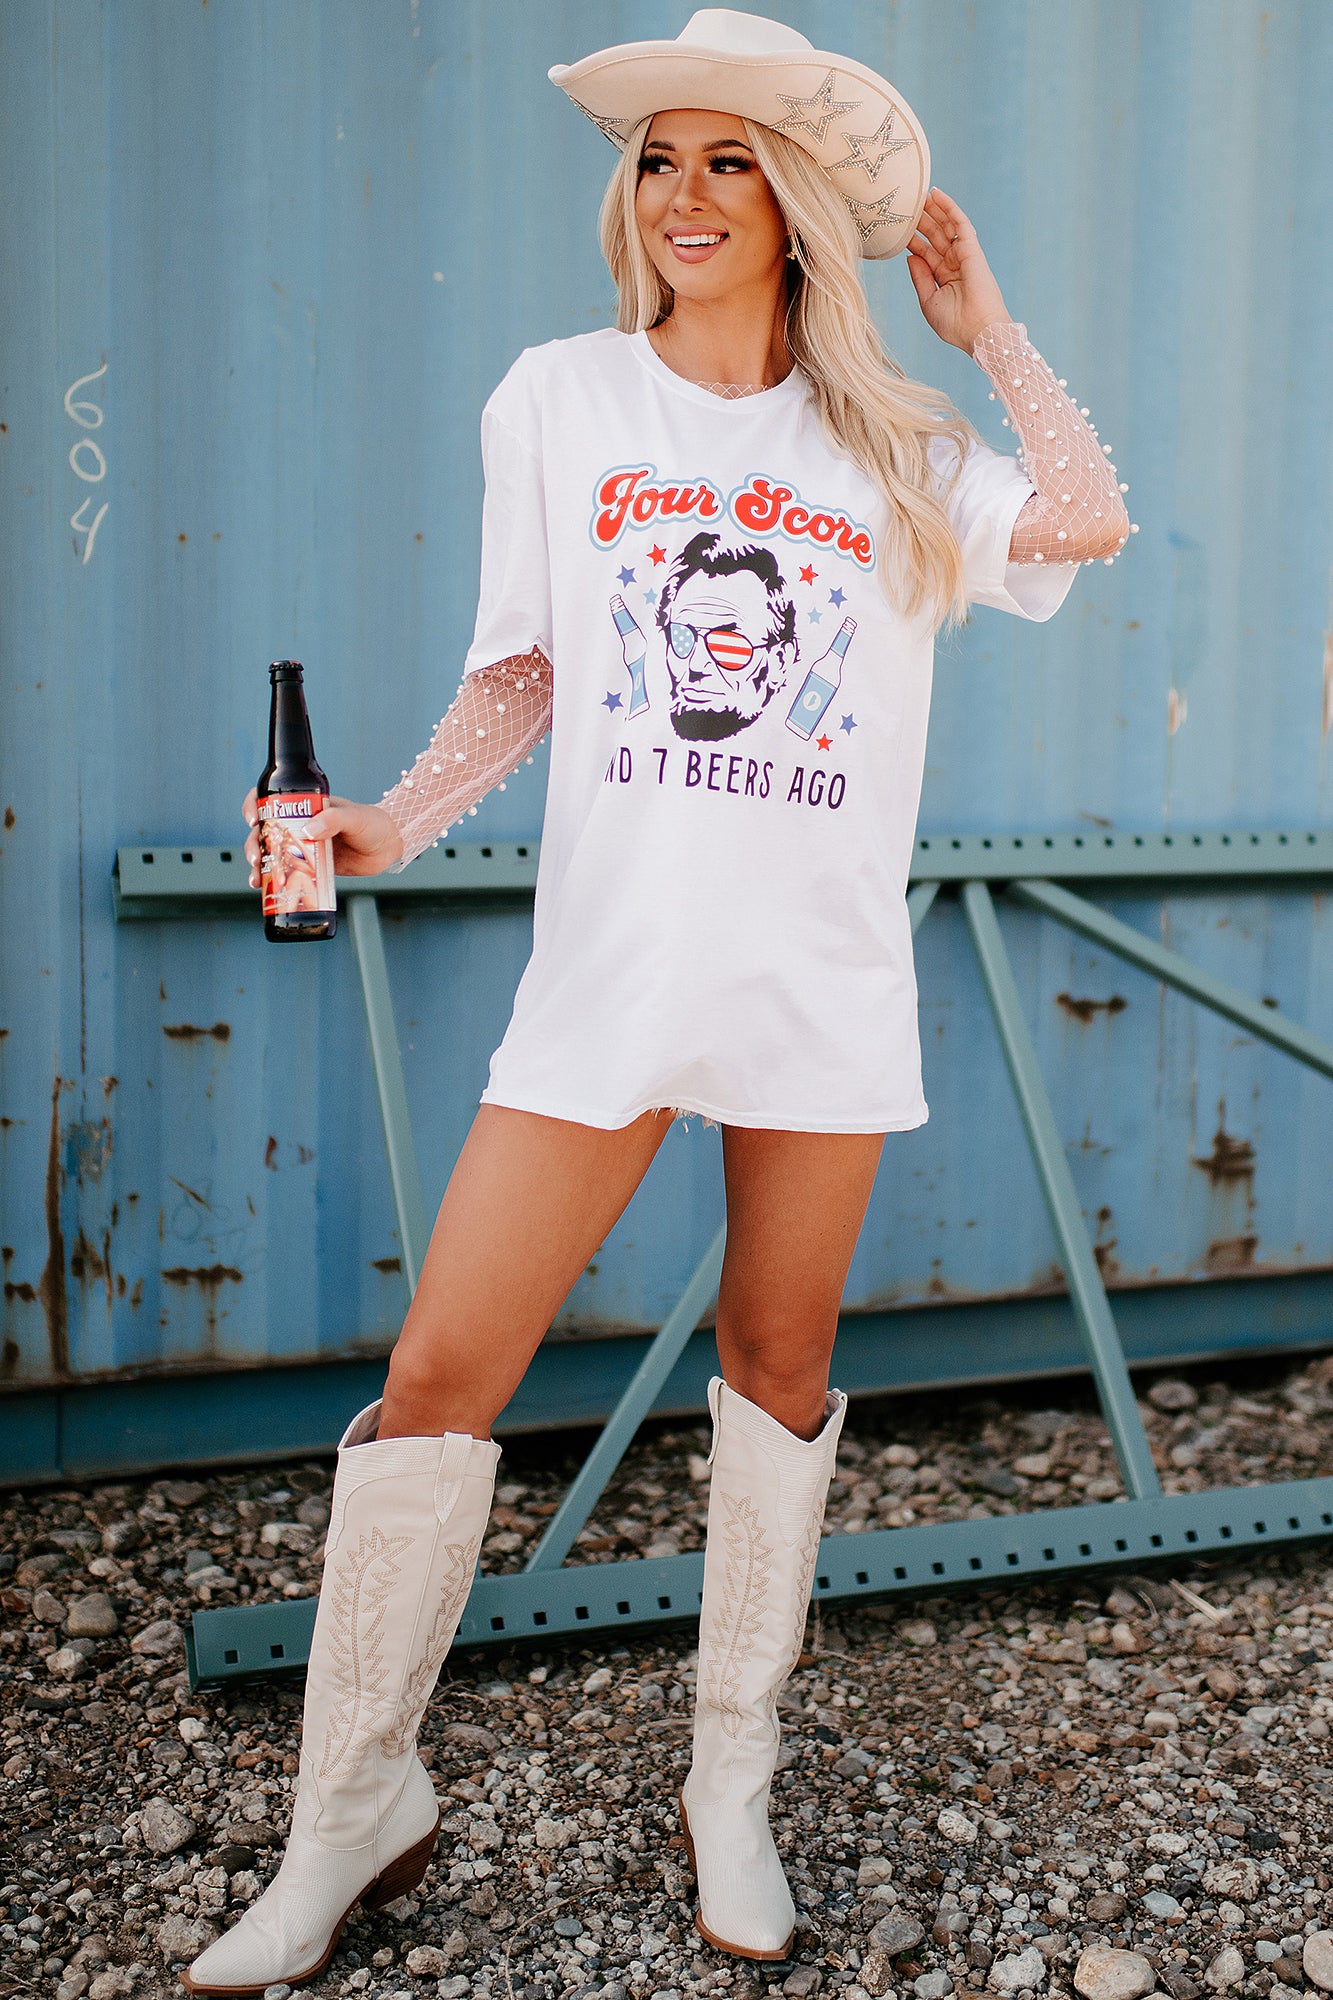 "Four Score And 7 Beers Ago" Graphic T-Shirt (White) - Print On Demand - NanaMacs